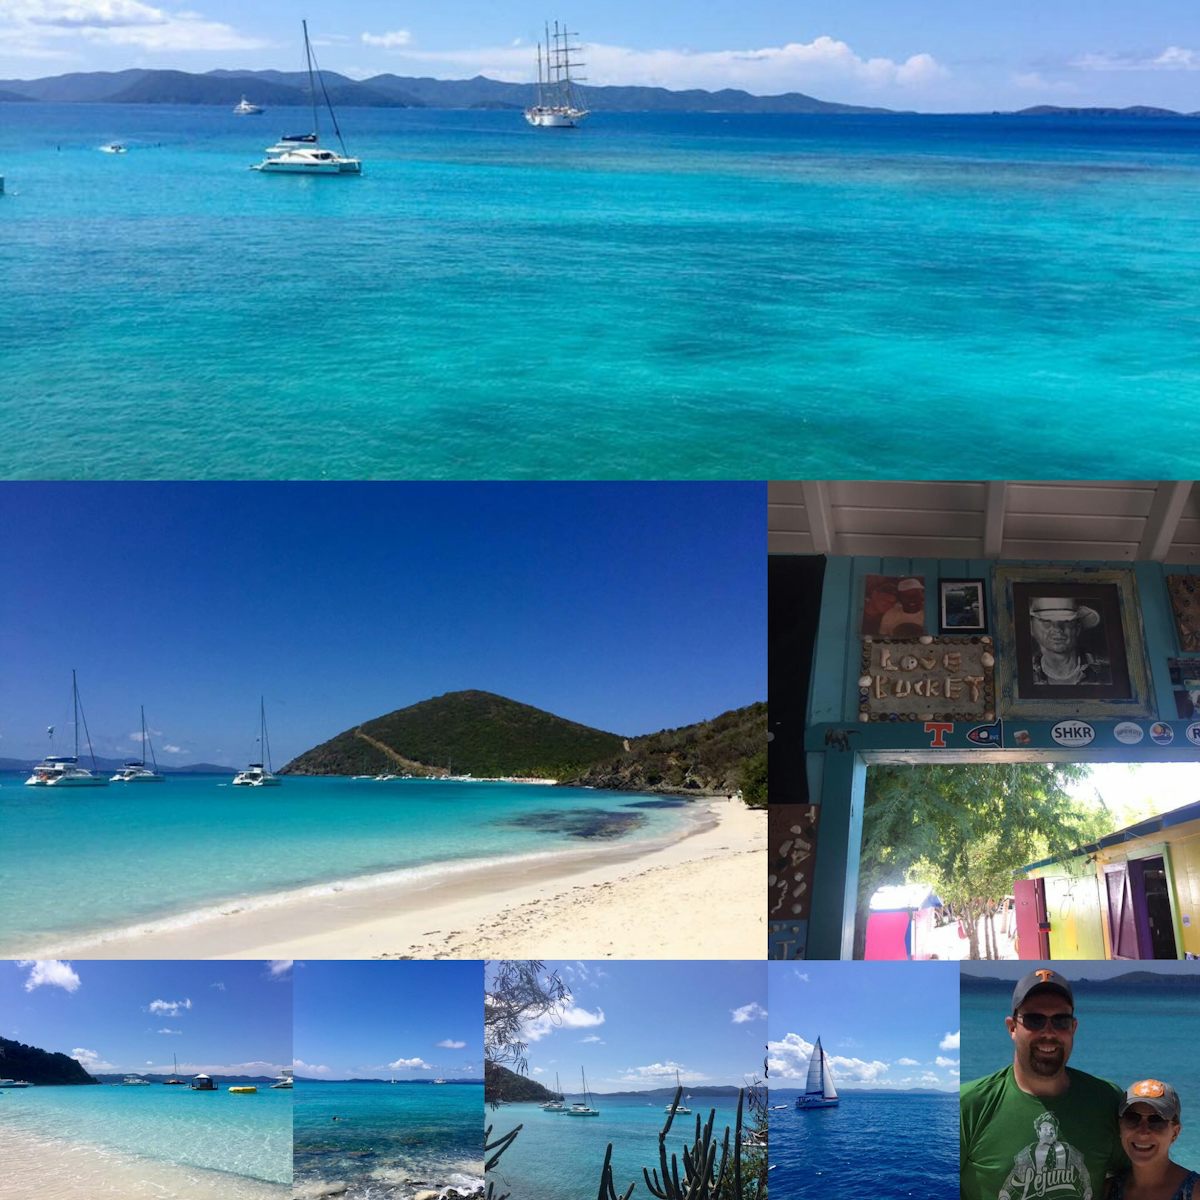 Tortola - excursion to Jost Van Dyke on Rebel Yell - HIGHLY recommend!